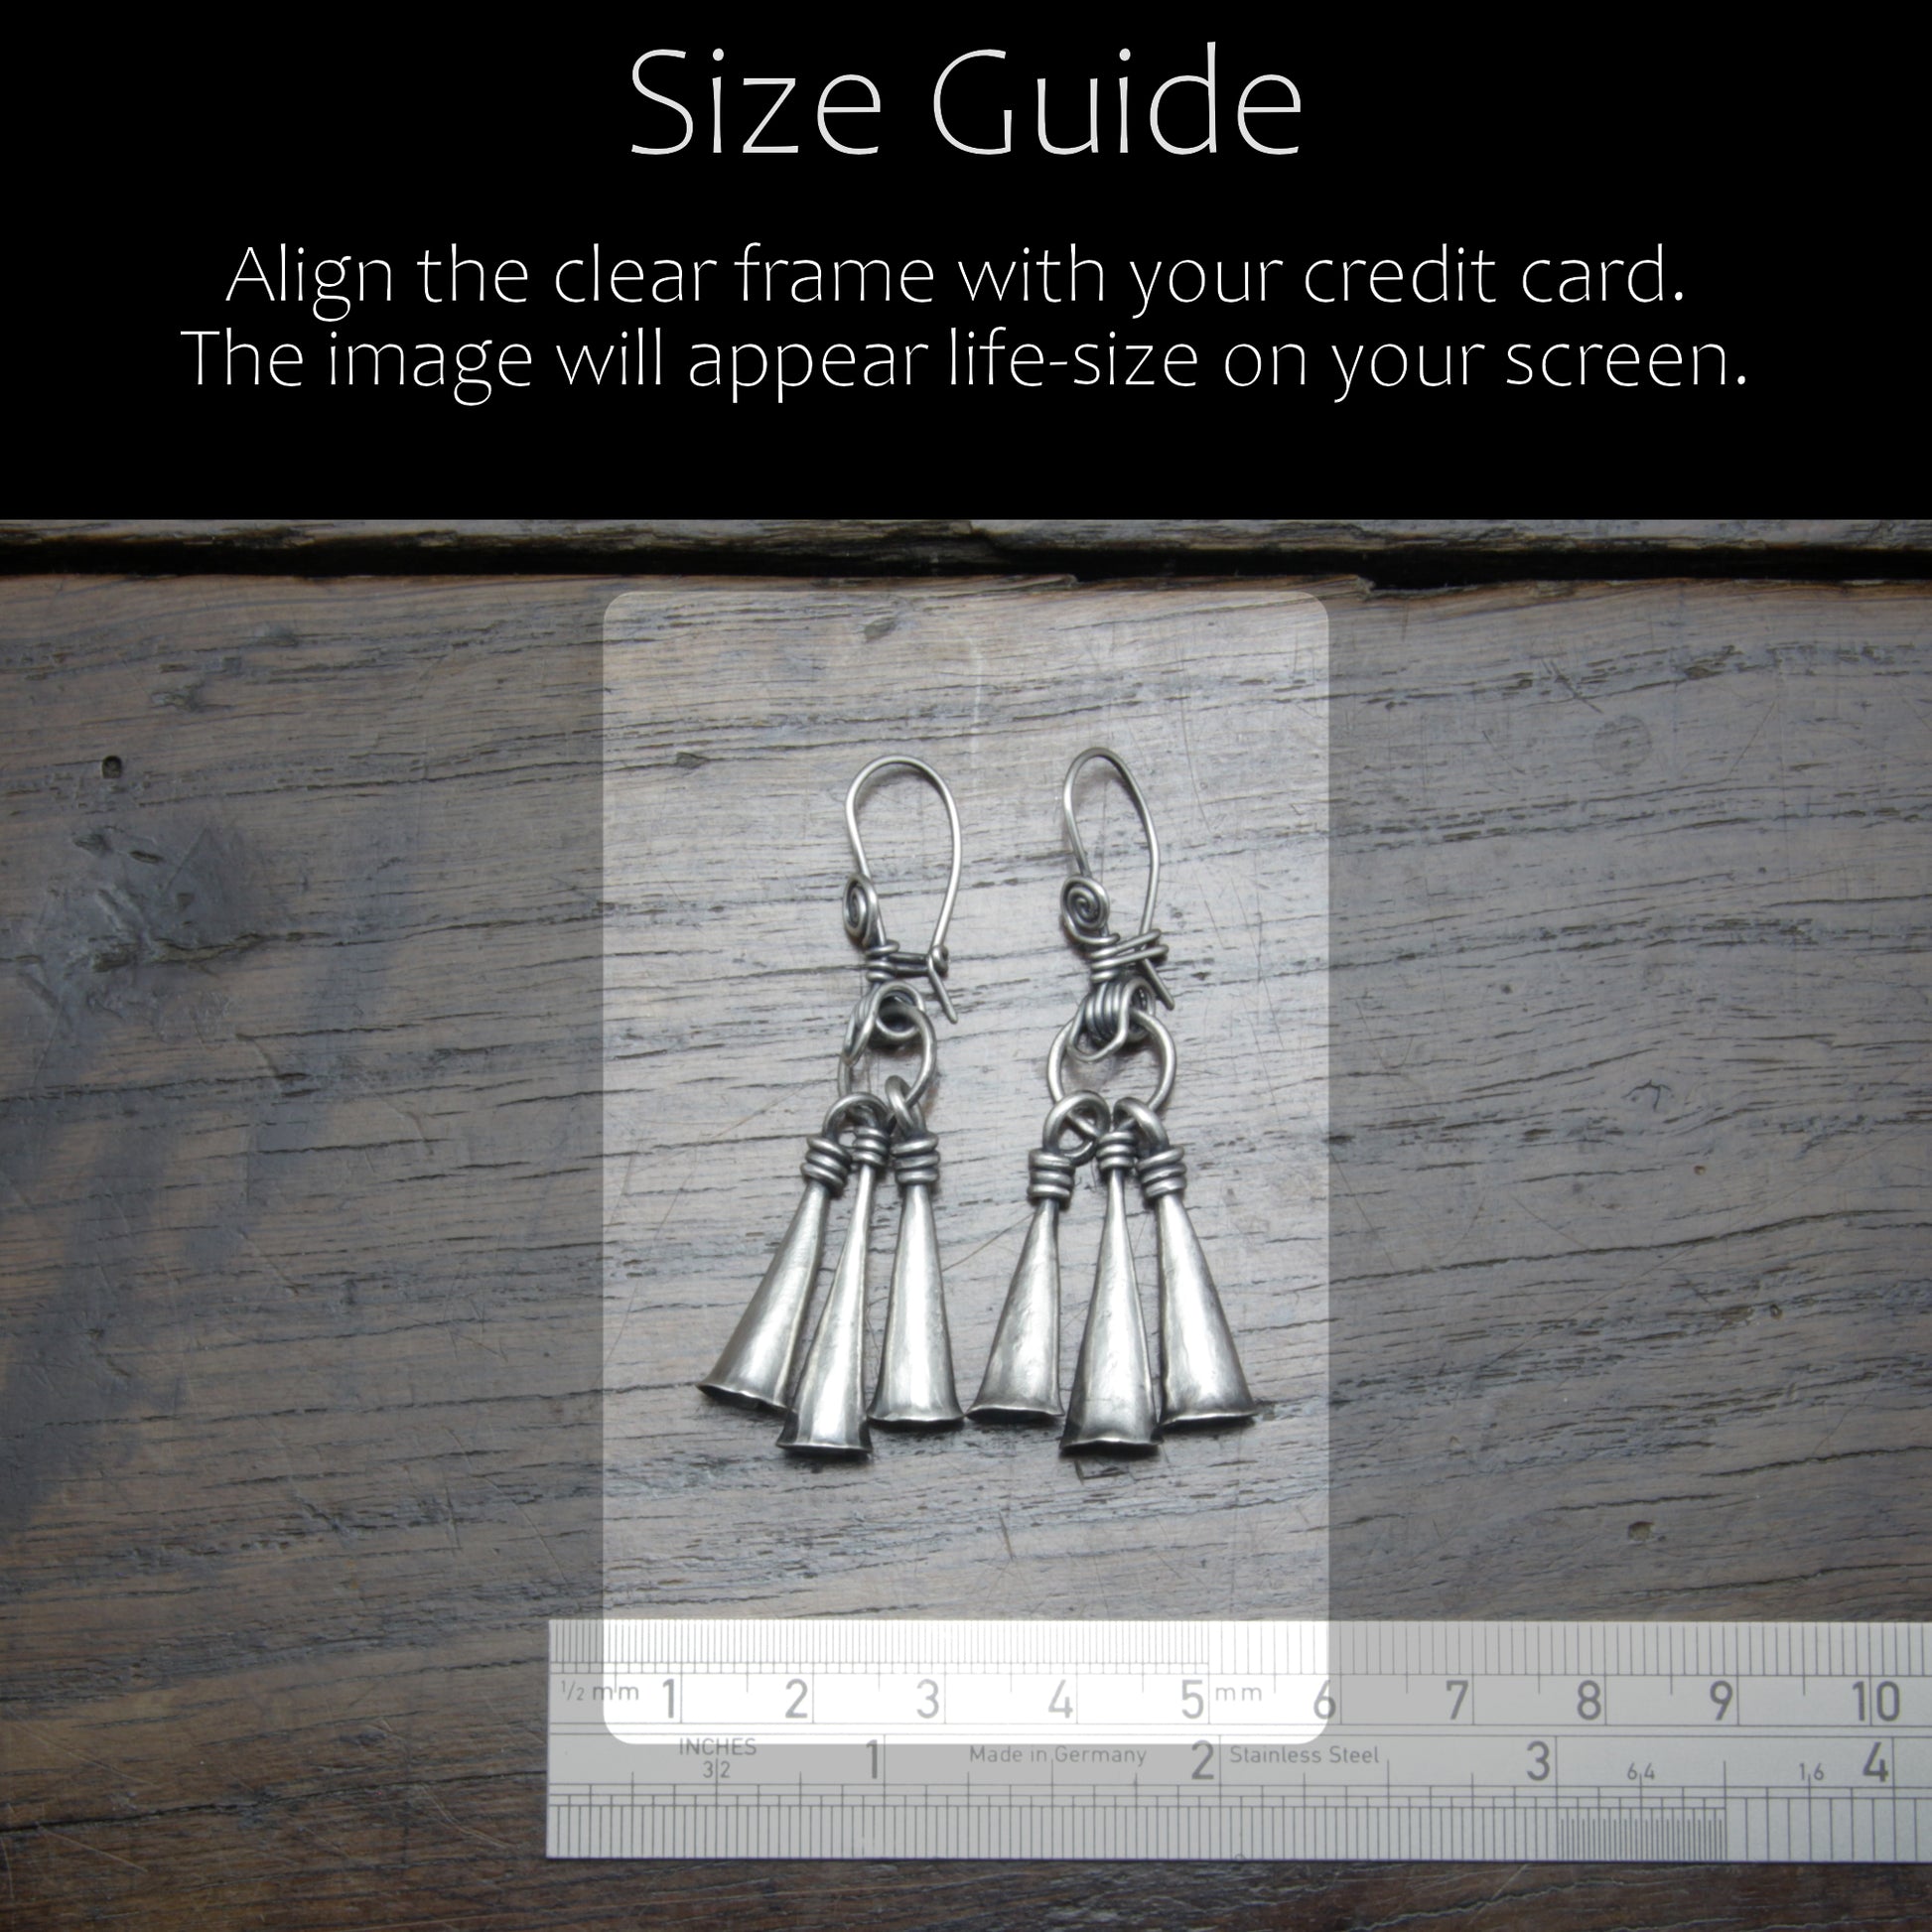 Size Guide. Align the clear frame with your credit card.  The image will appear life-size on your screen